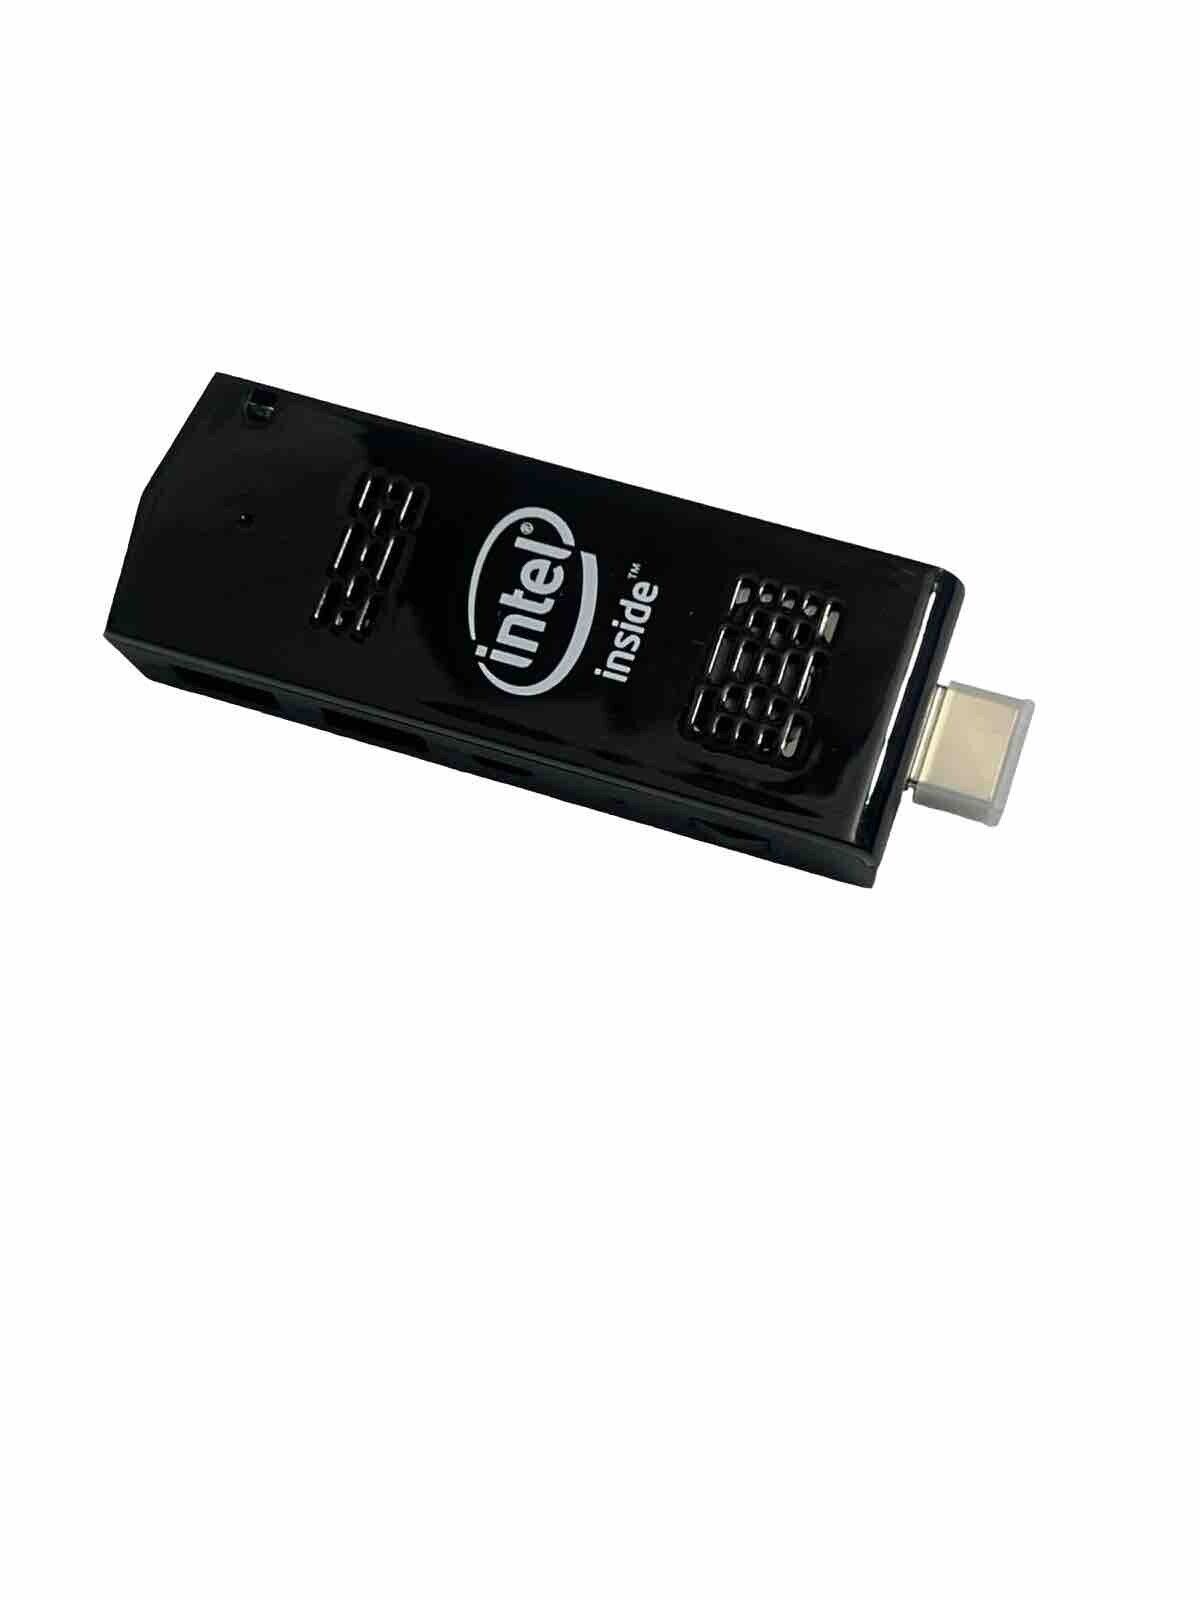 Intel STCK1A8LFC 64GB PC Compute Stick with Linux